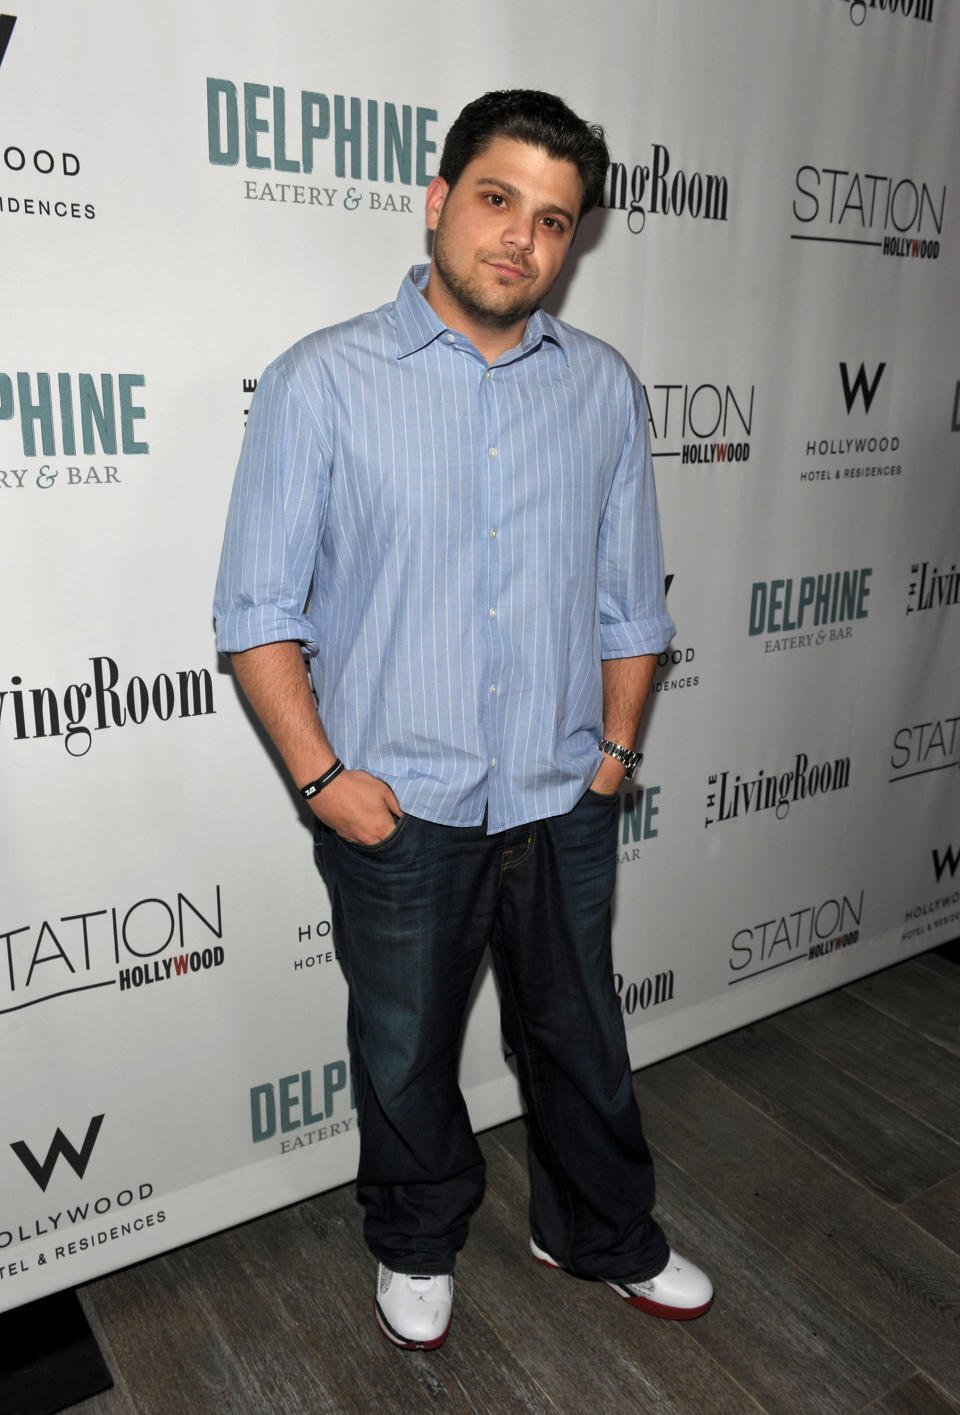 Ferrara attends the grand opening party for Delphine restaurant at the W Hollywood Hotel & Residences on February 11, 2010 in Hollywood, California